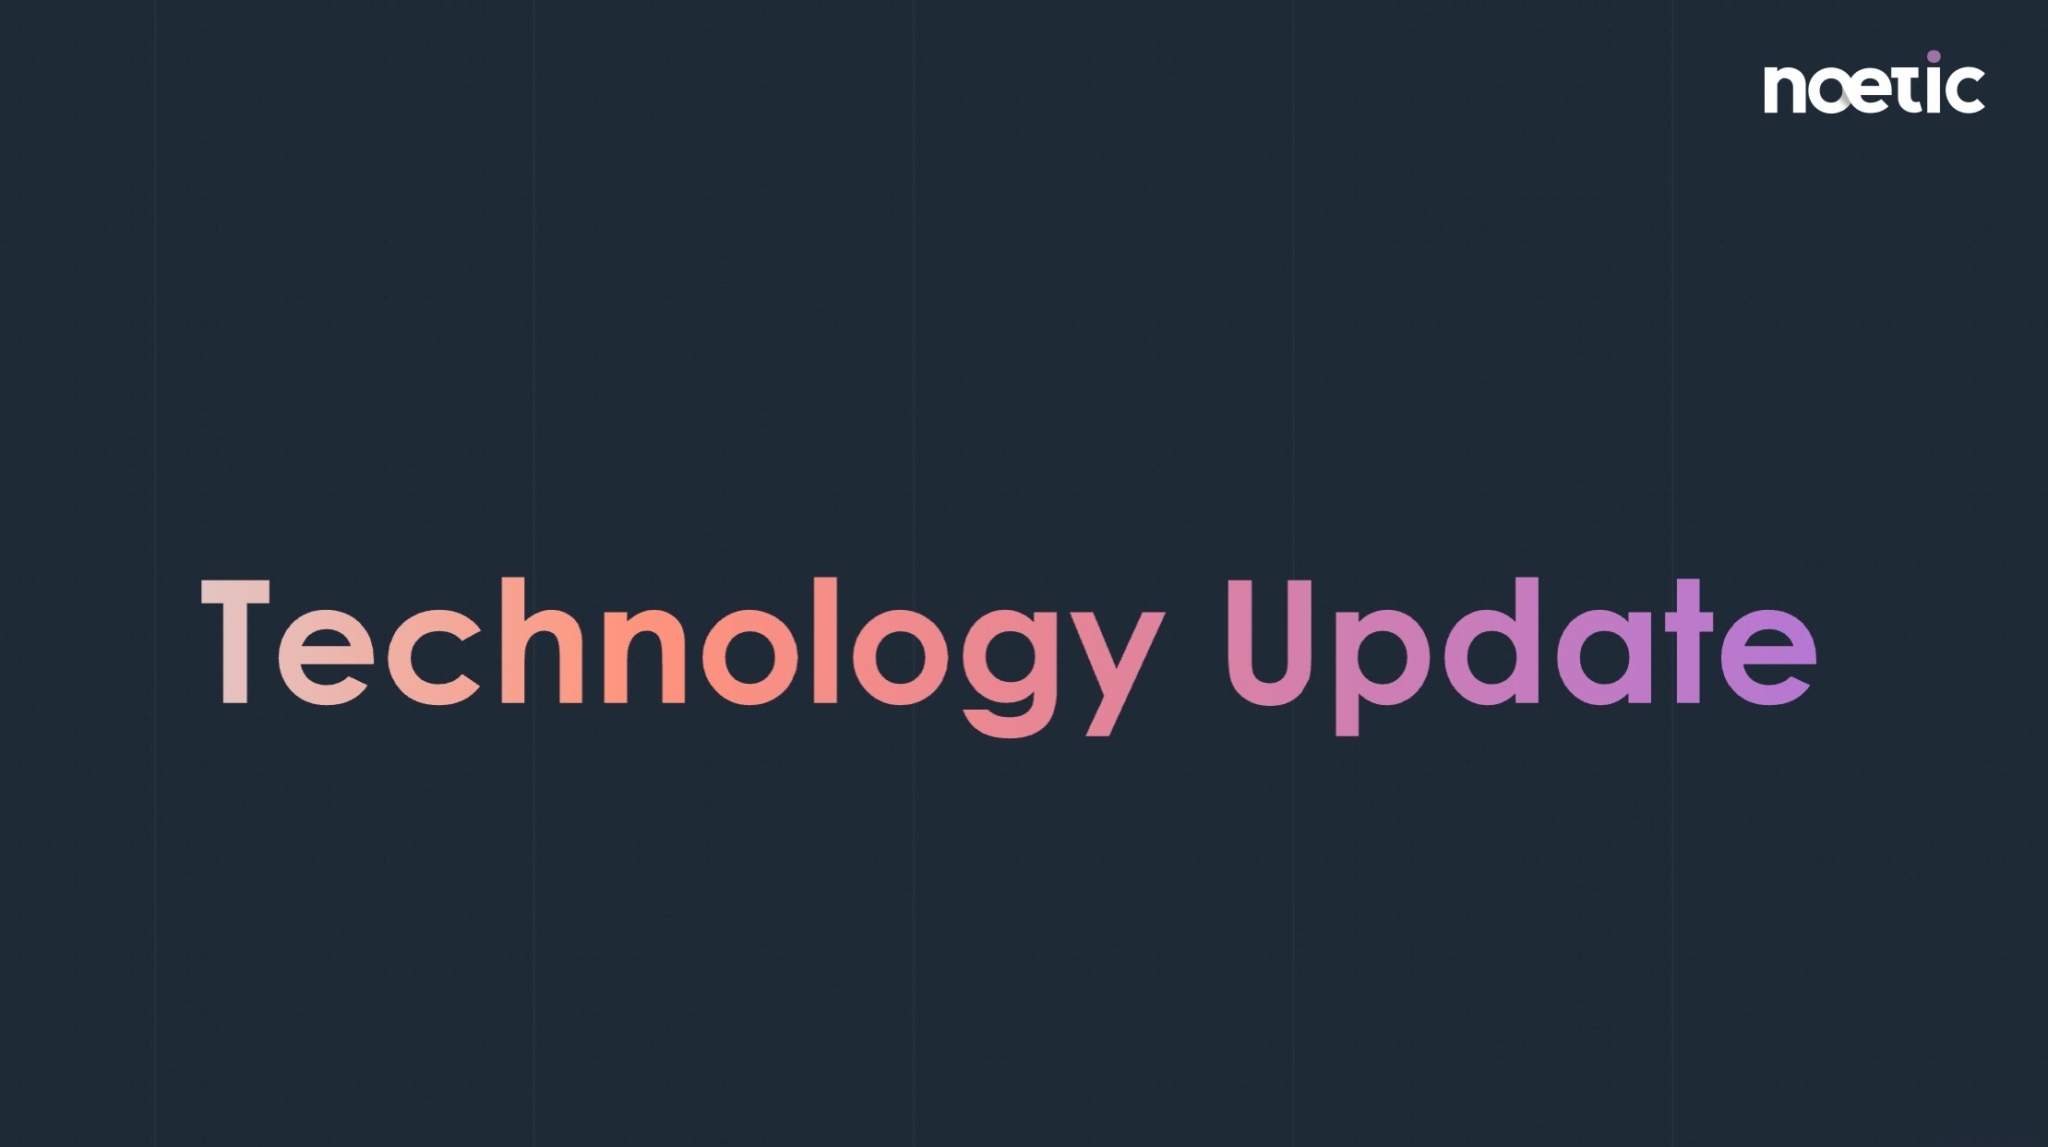 A photo of technology update text